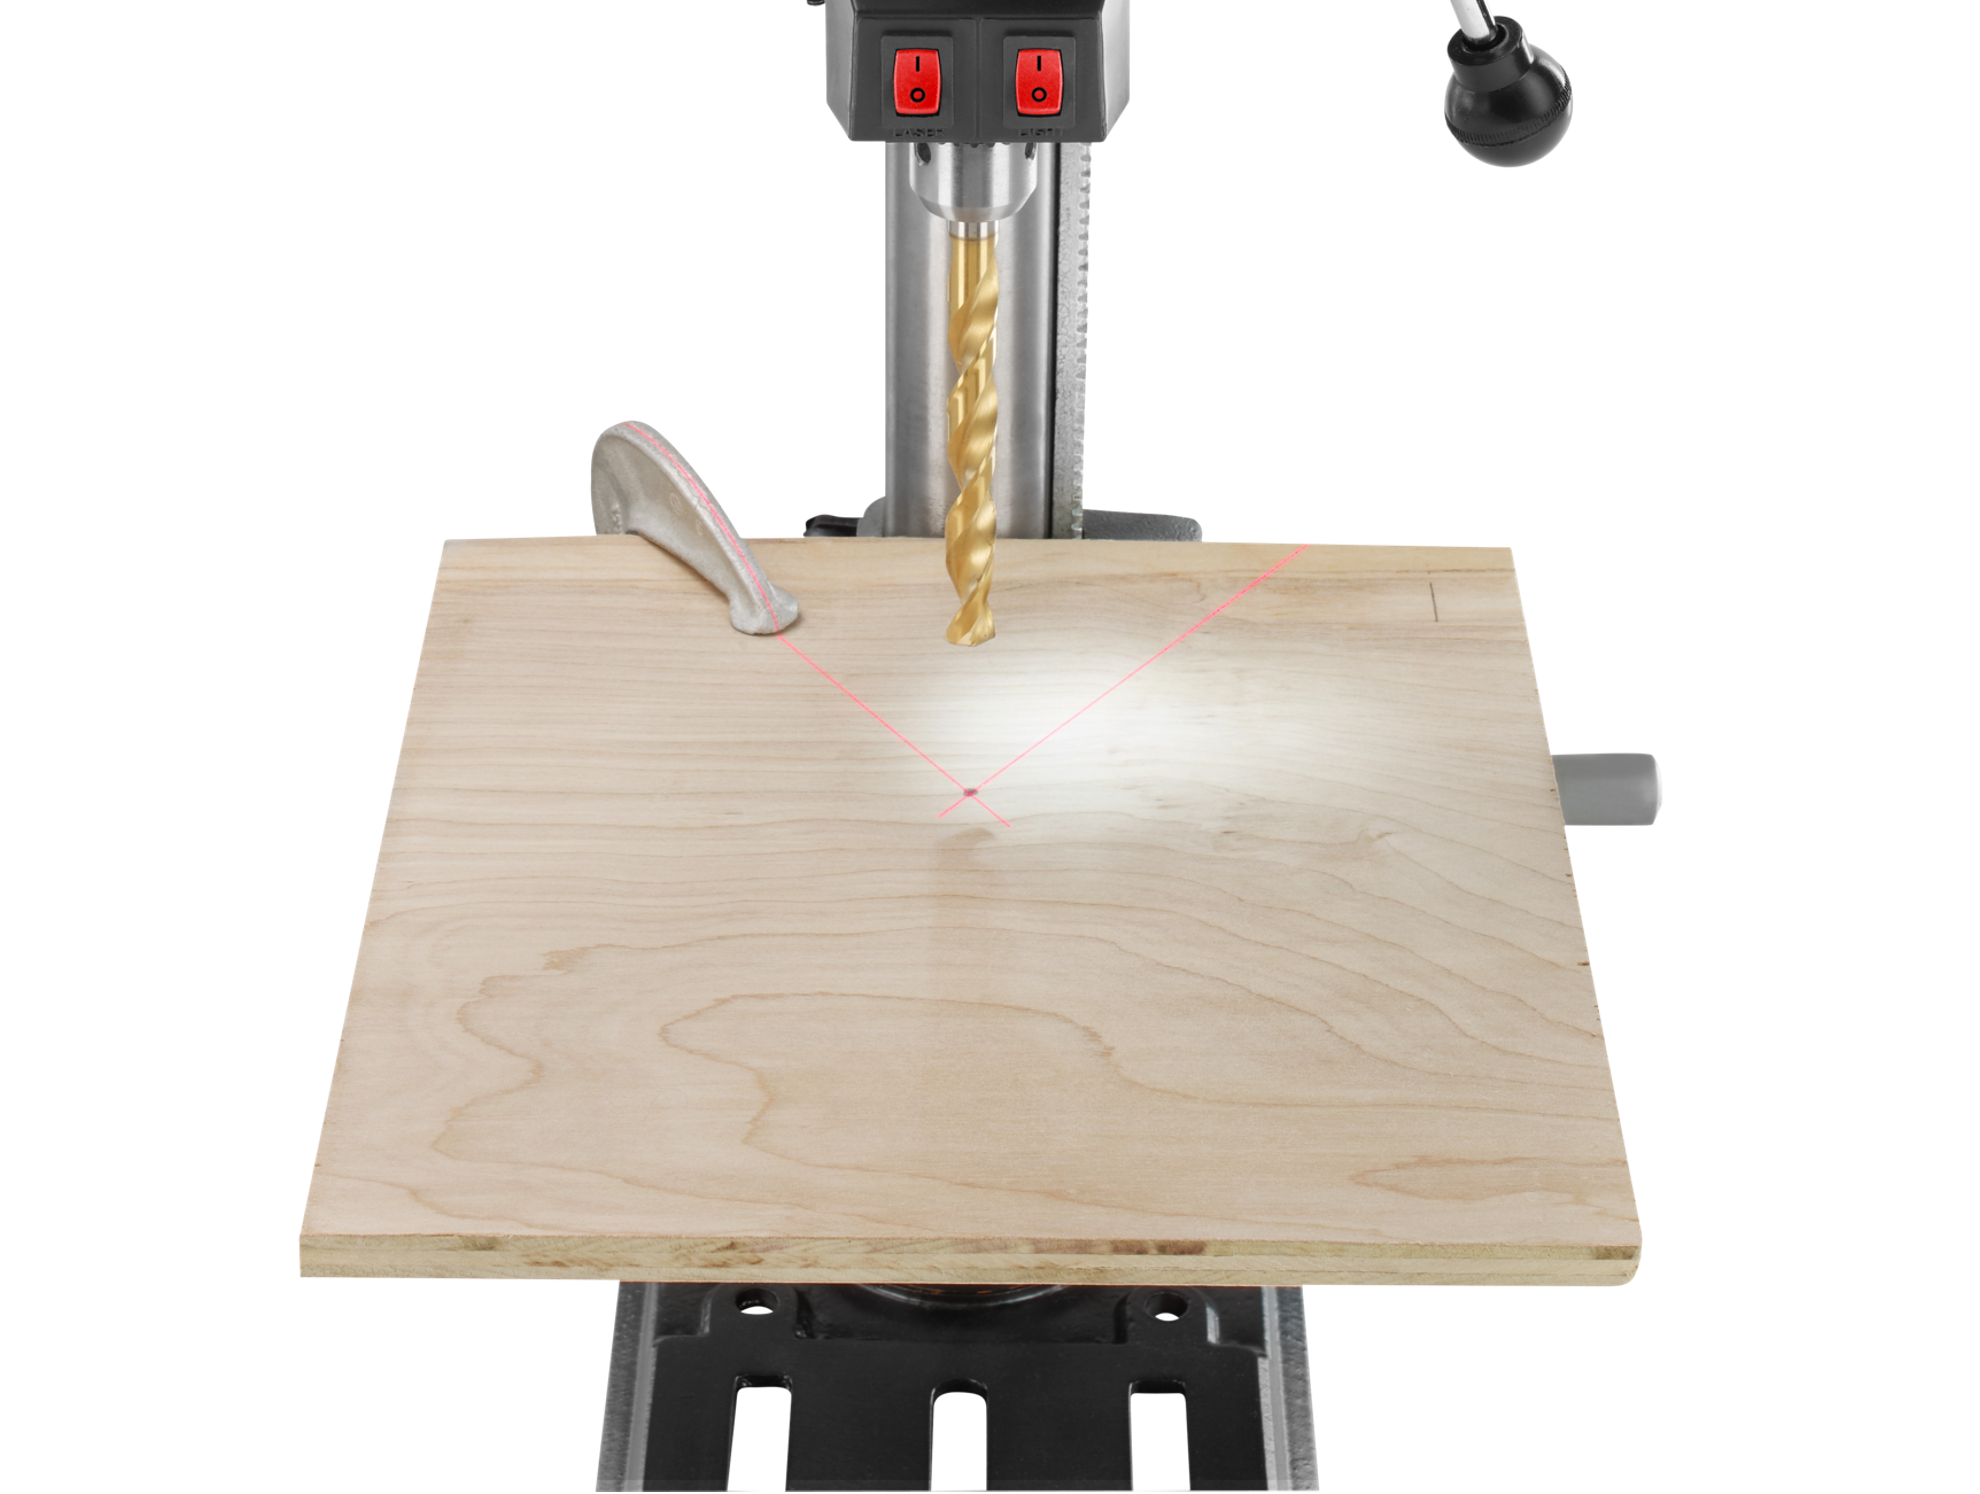 EXACTLINE Laser Alignment System With Integrated Worklight